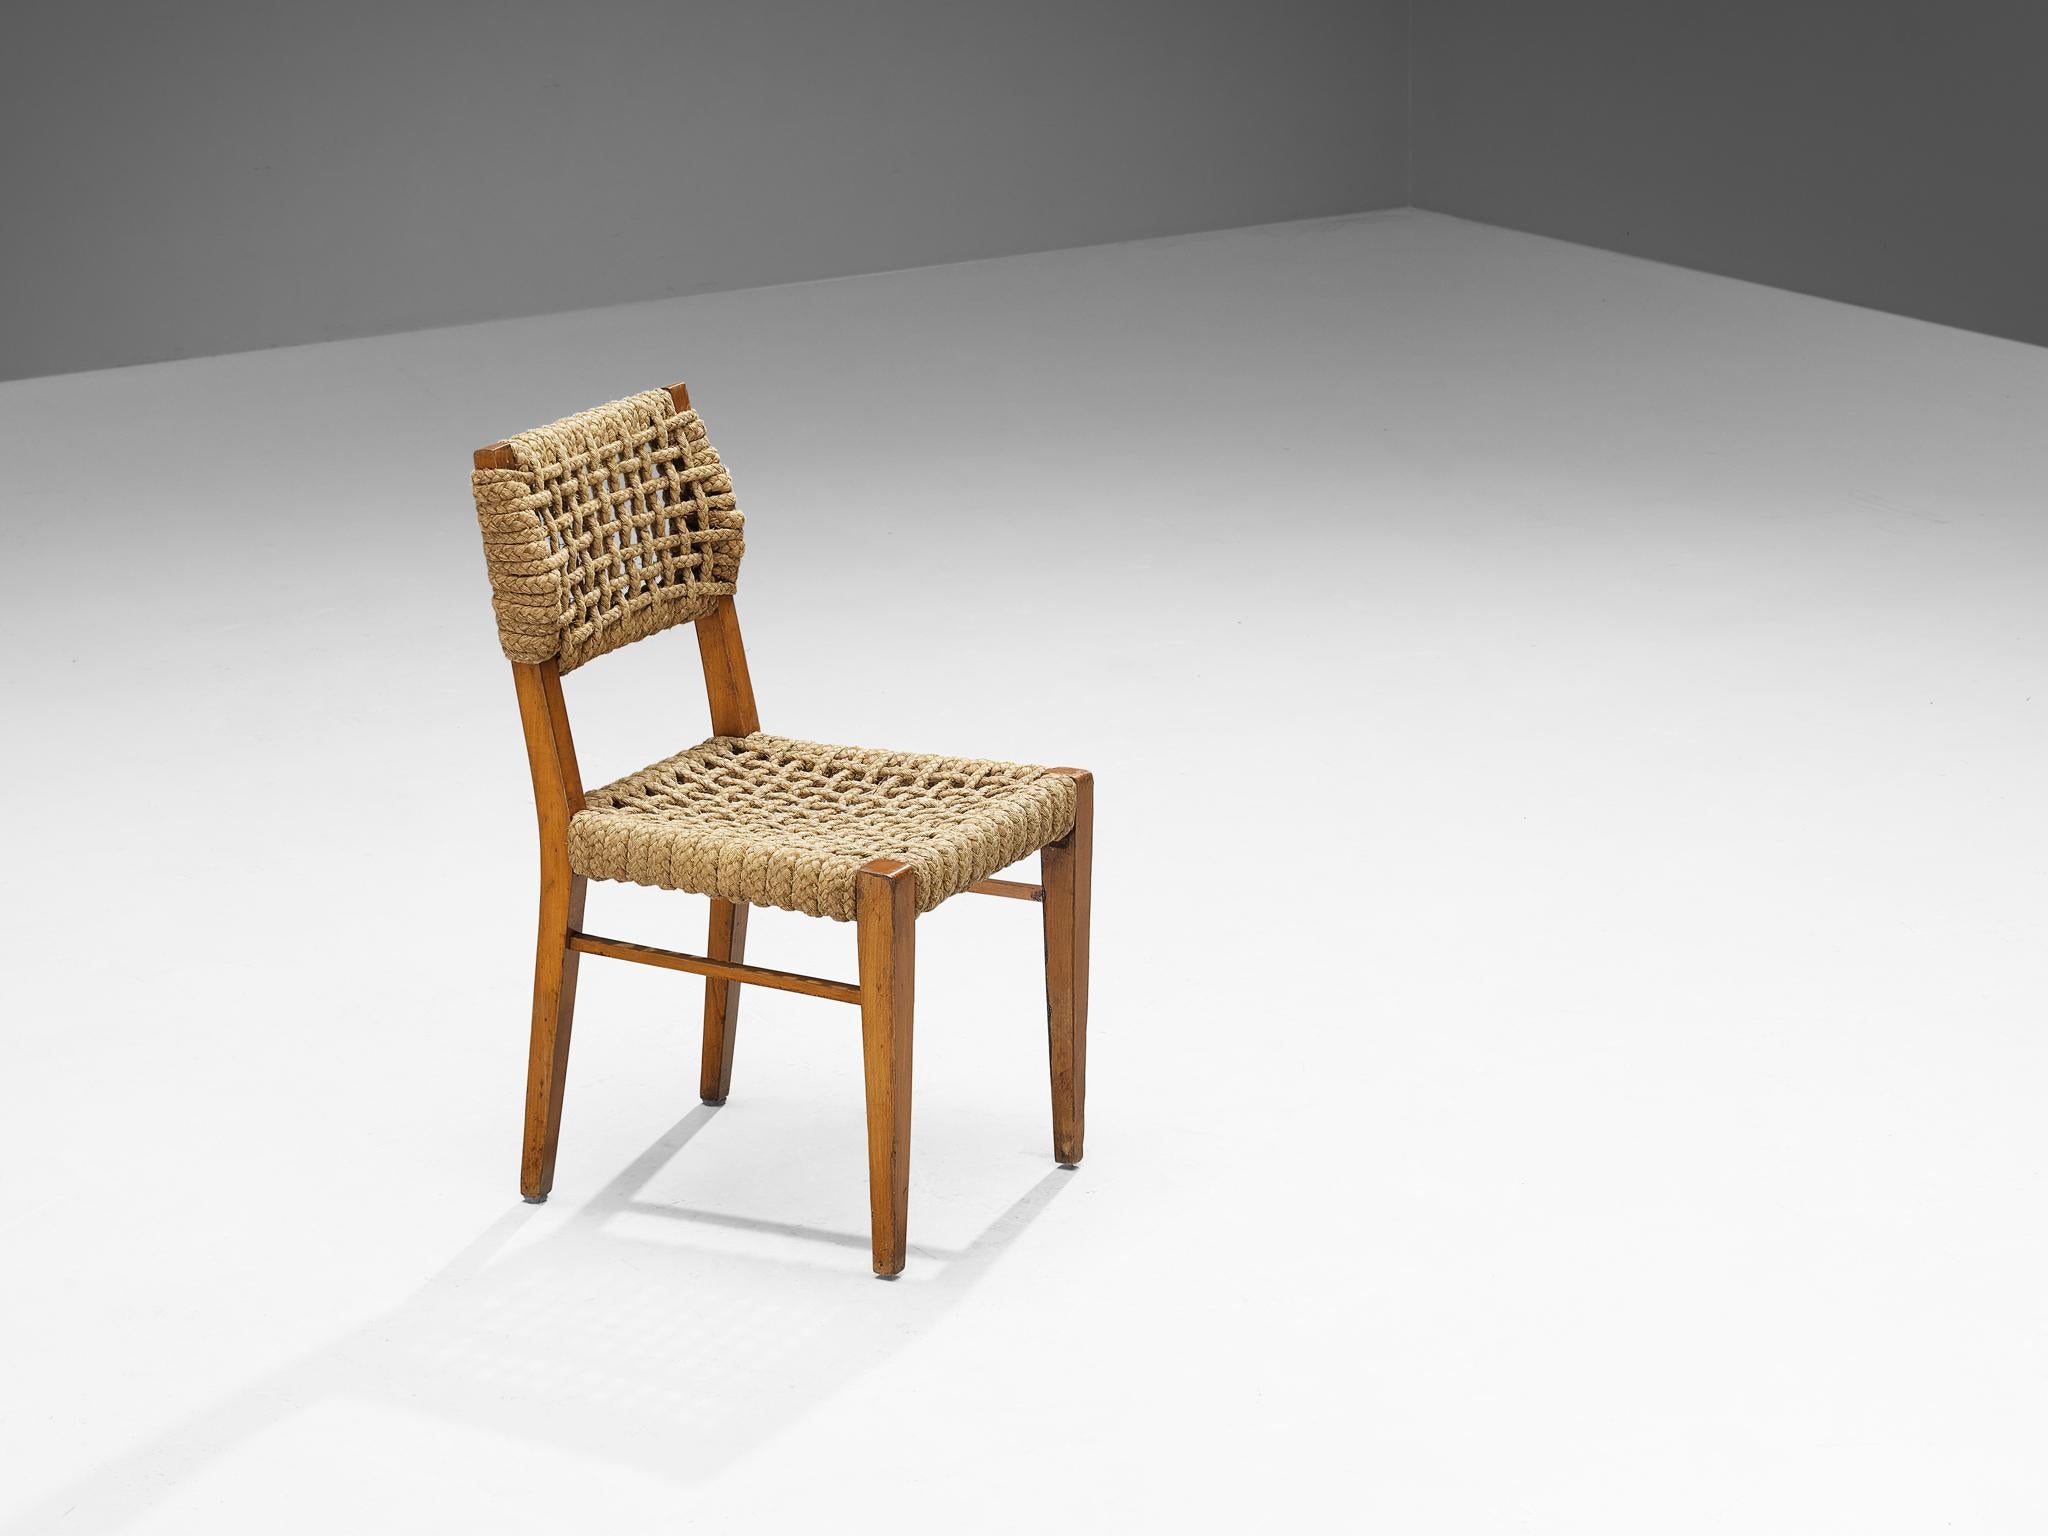 Mid-20th Century Adrien Audoux and Frida Minet Chair with Rope Seating  For Sale